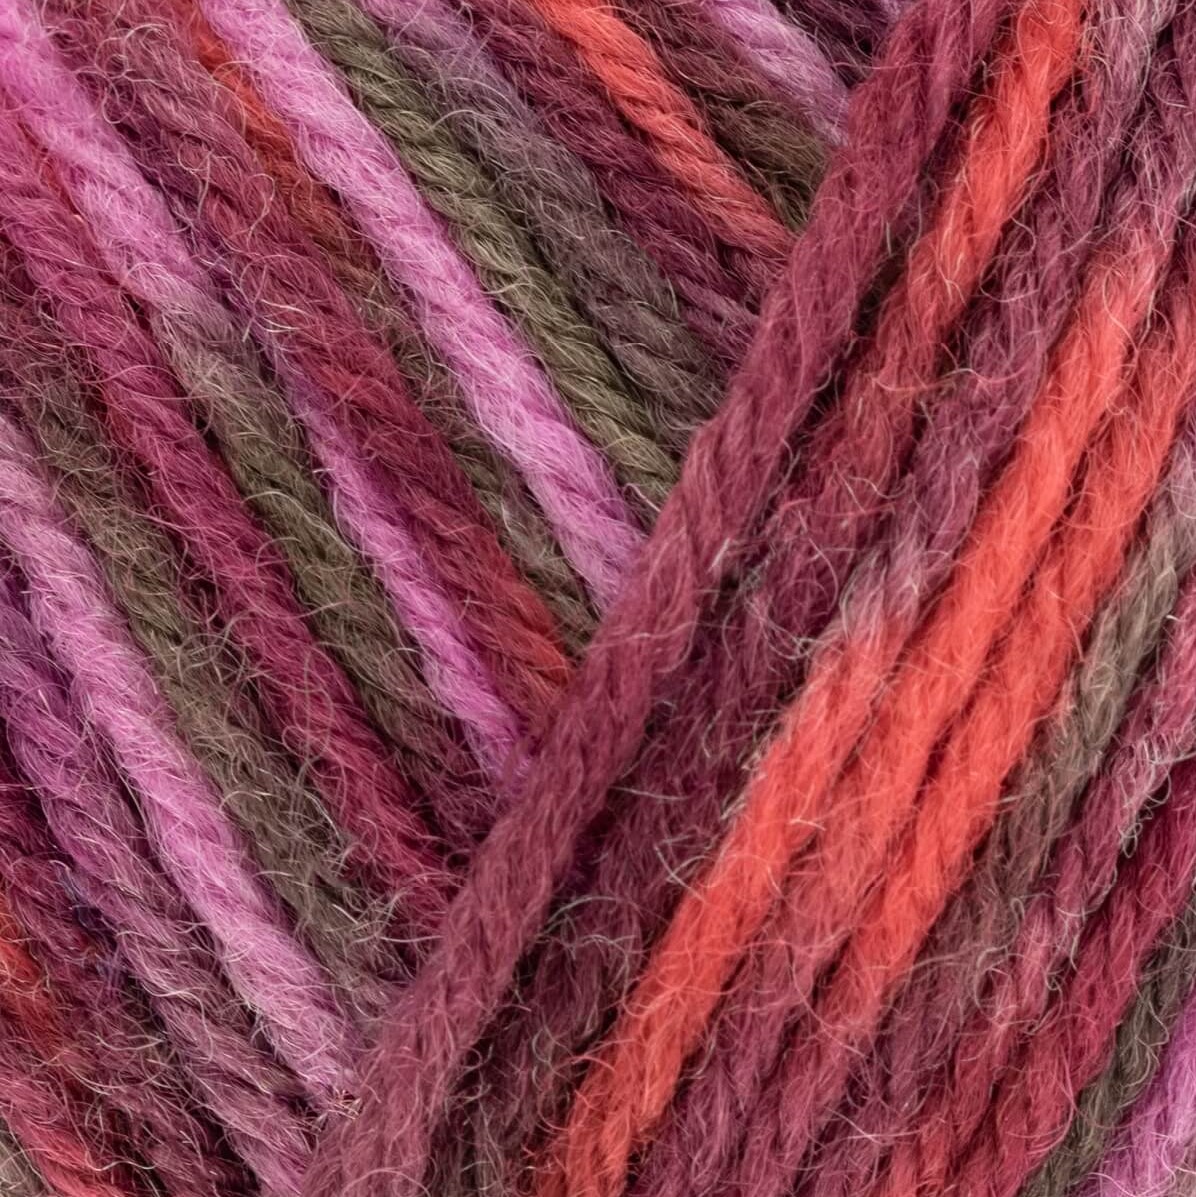 West Yorkshire Spinners Zandra Rhodes Signature 4ply - Botanical Bloom 1024